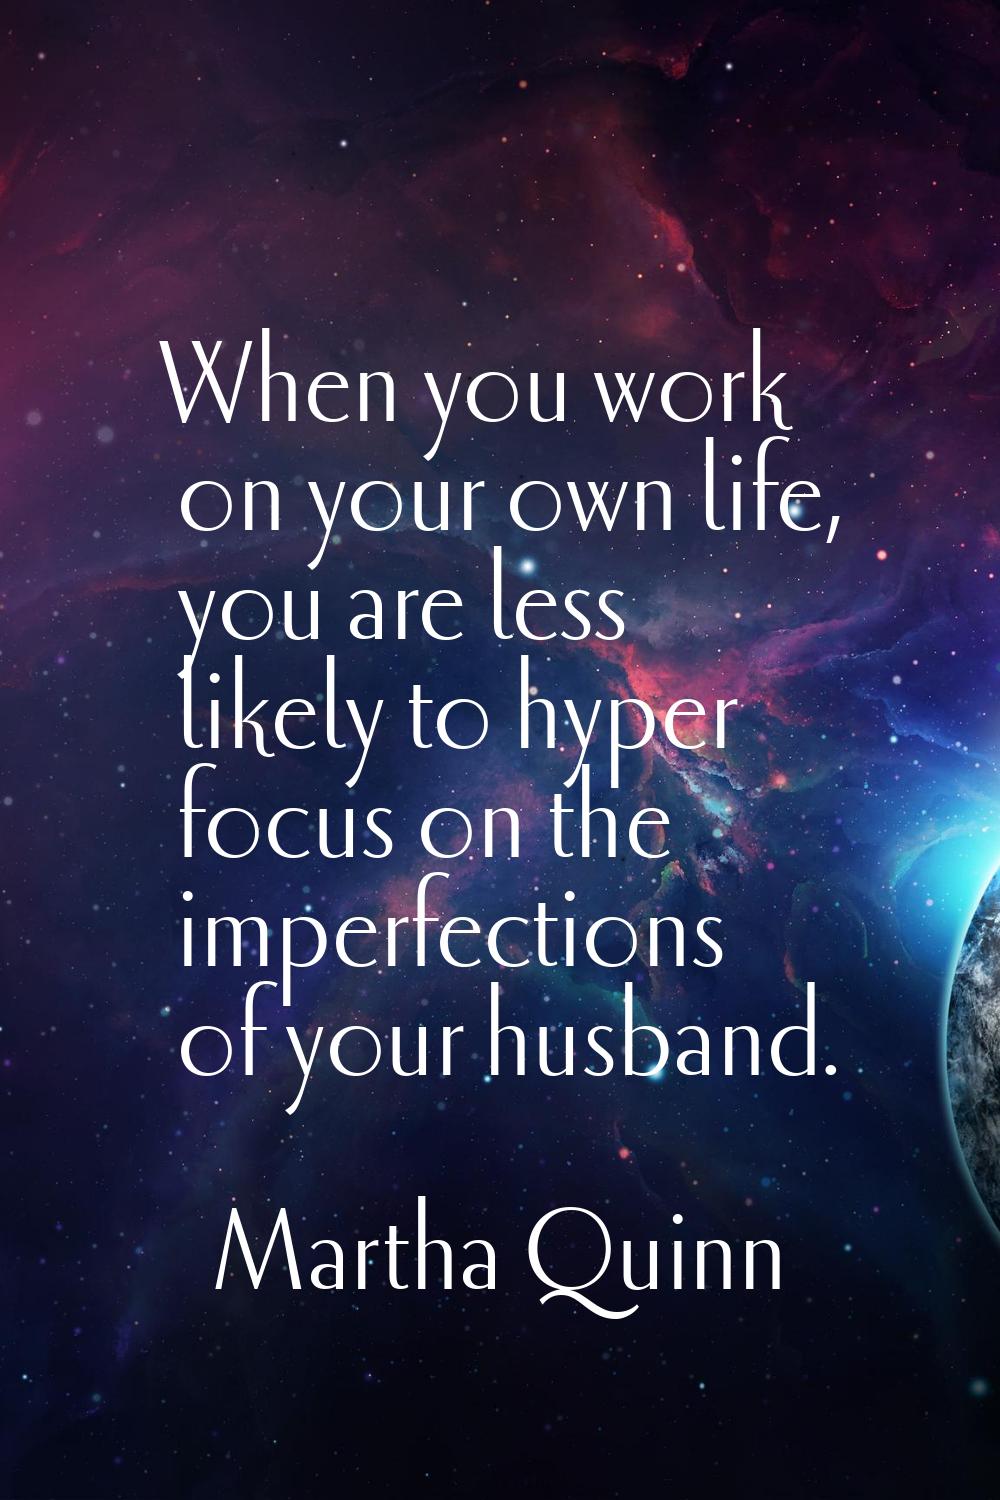 When you work on your own life, you are less likely to hyper focus on the imperfections of your hus